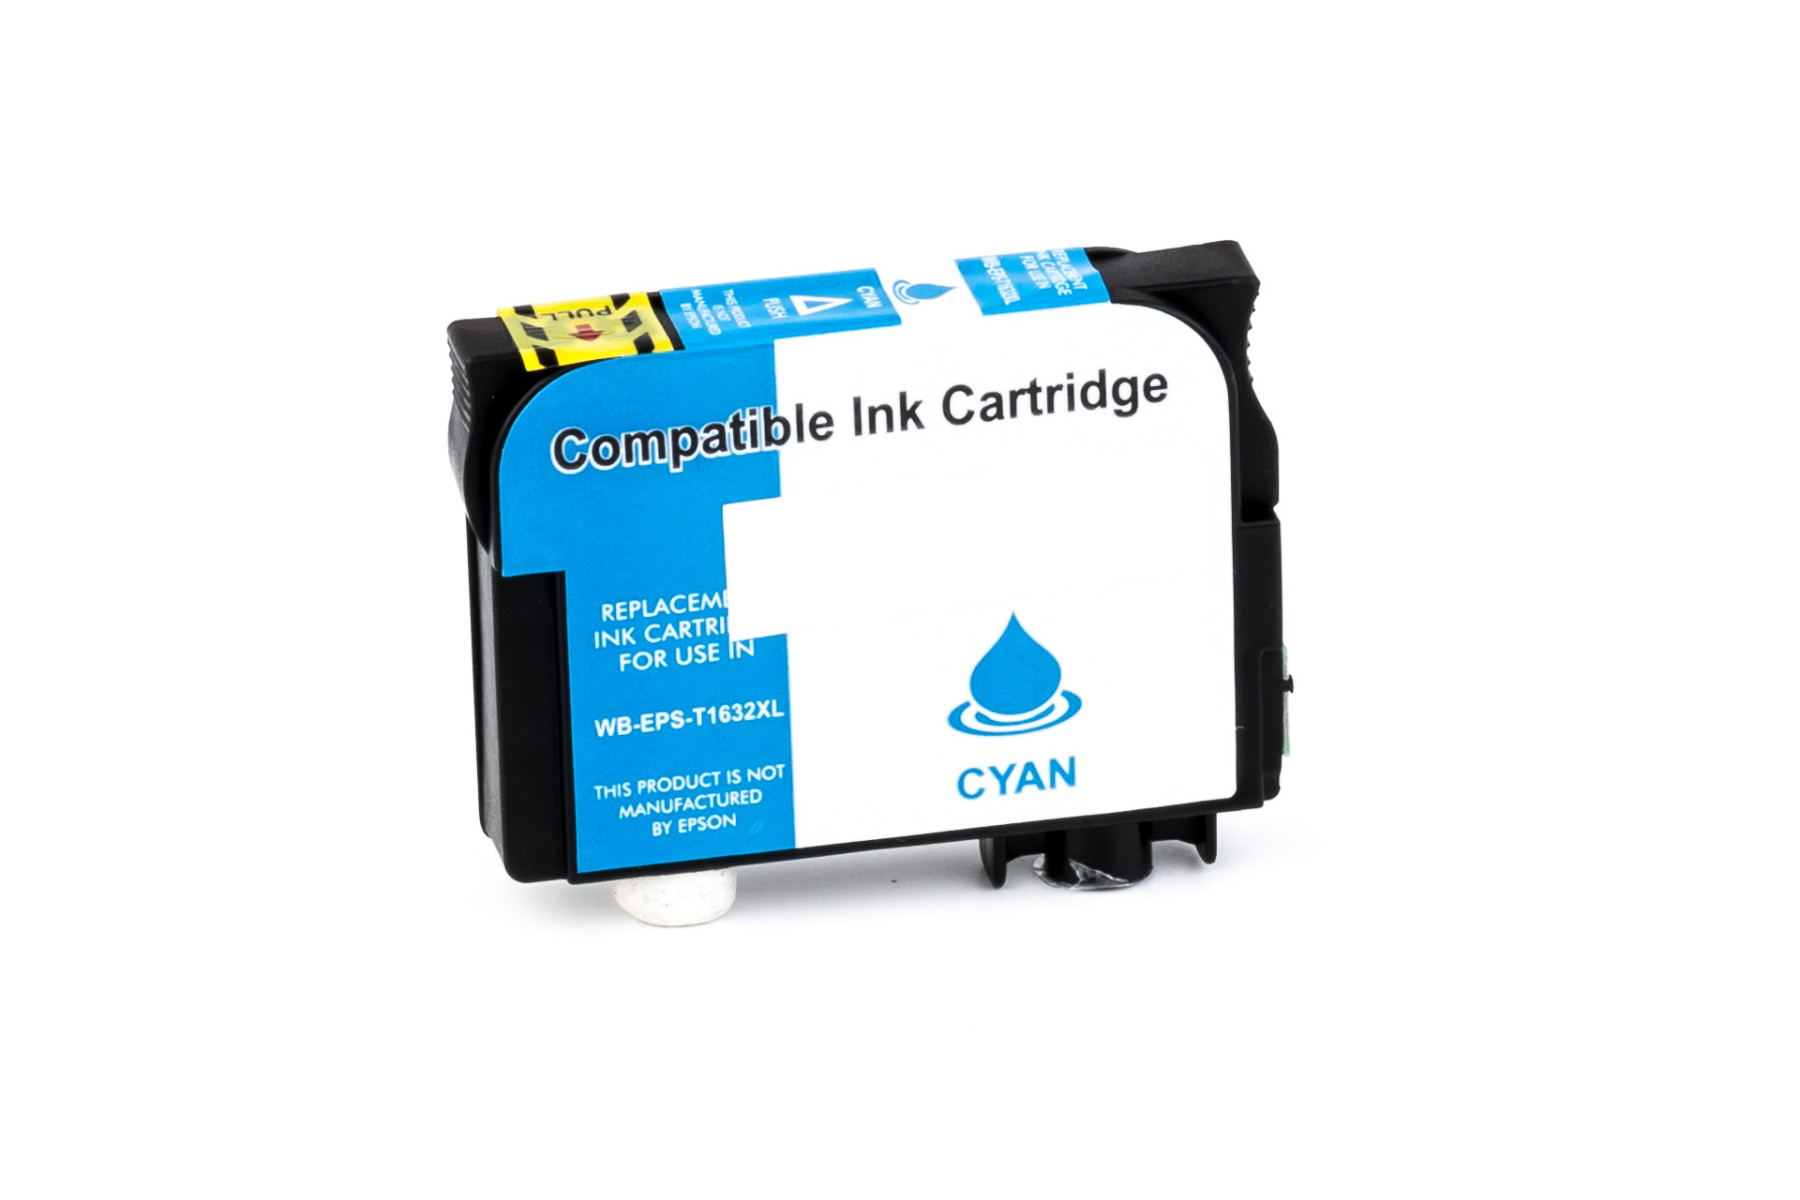 Set consisting of Ink cartridge (alternative) compatible with Epson - C13T16314010/C 13 T 16314010 - 16XL - Workforce WF 2010 W black, C13T16324010/C 13 T 16324010 - 16XL - Workforce WF 2010 W cyan, C13T16334010/C 13 T 16334010 - 16XL - Workforce WF 2010 